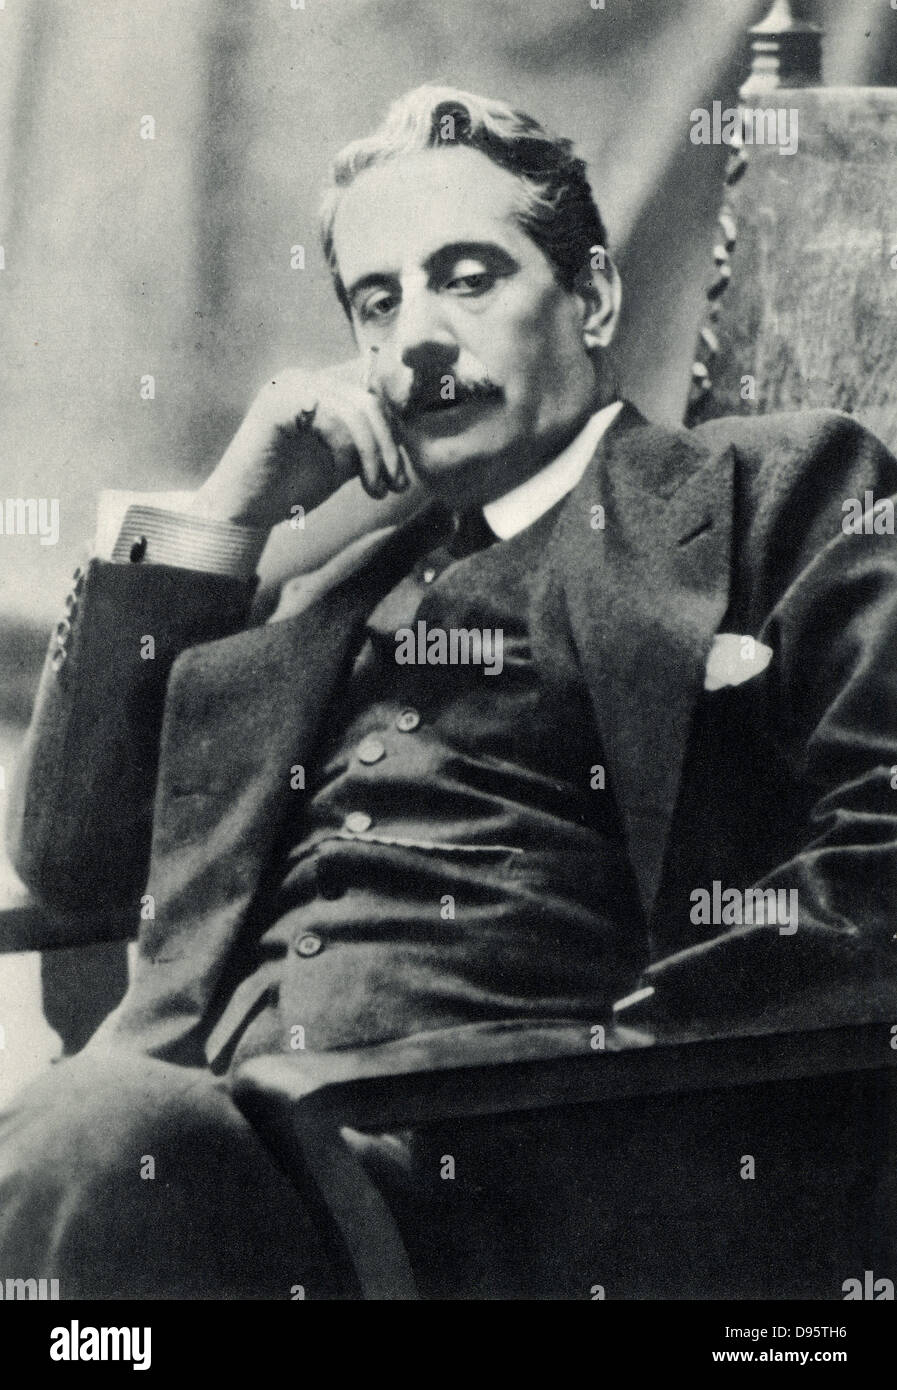 Giacomo Puccini (1858-1924) in 1910. Italian composer, mainly of opera. After a photograph. Stock Photo